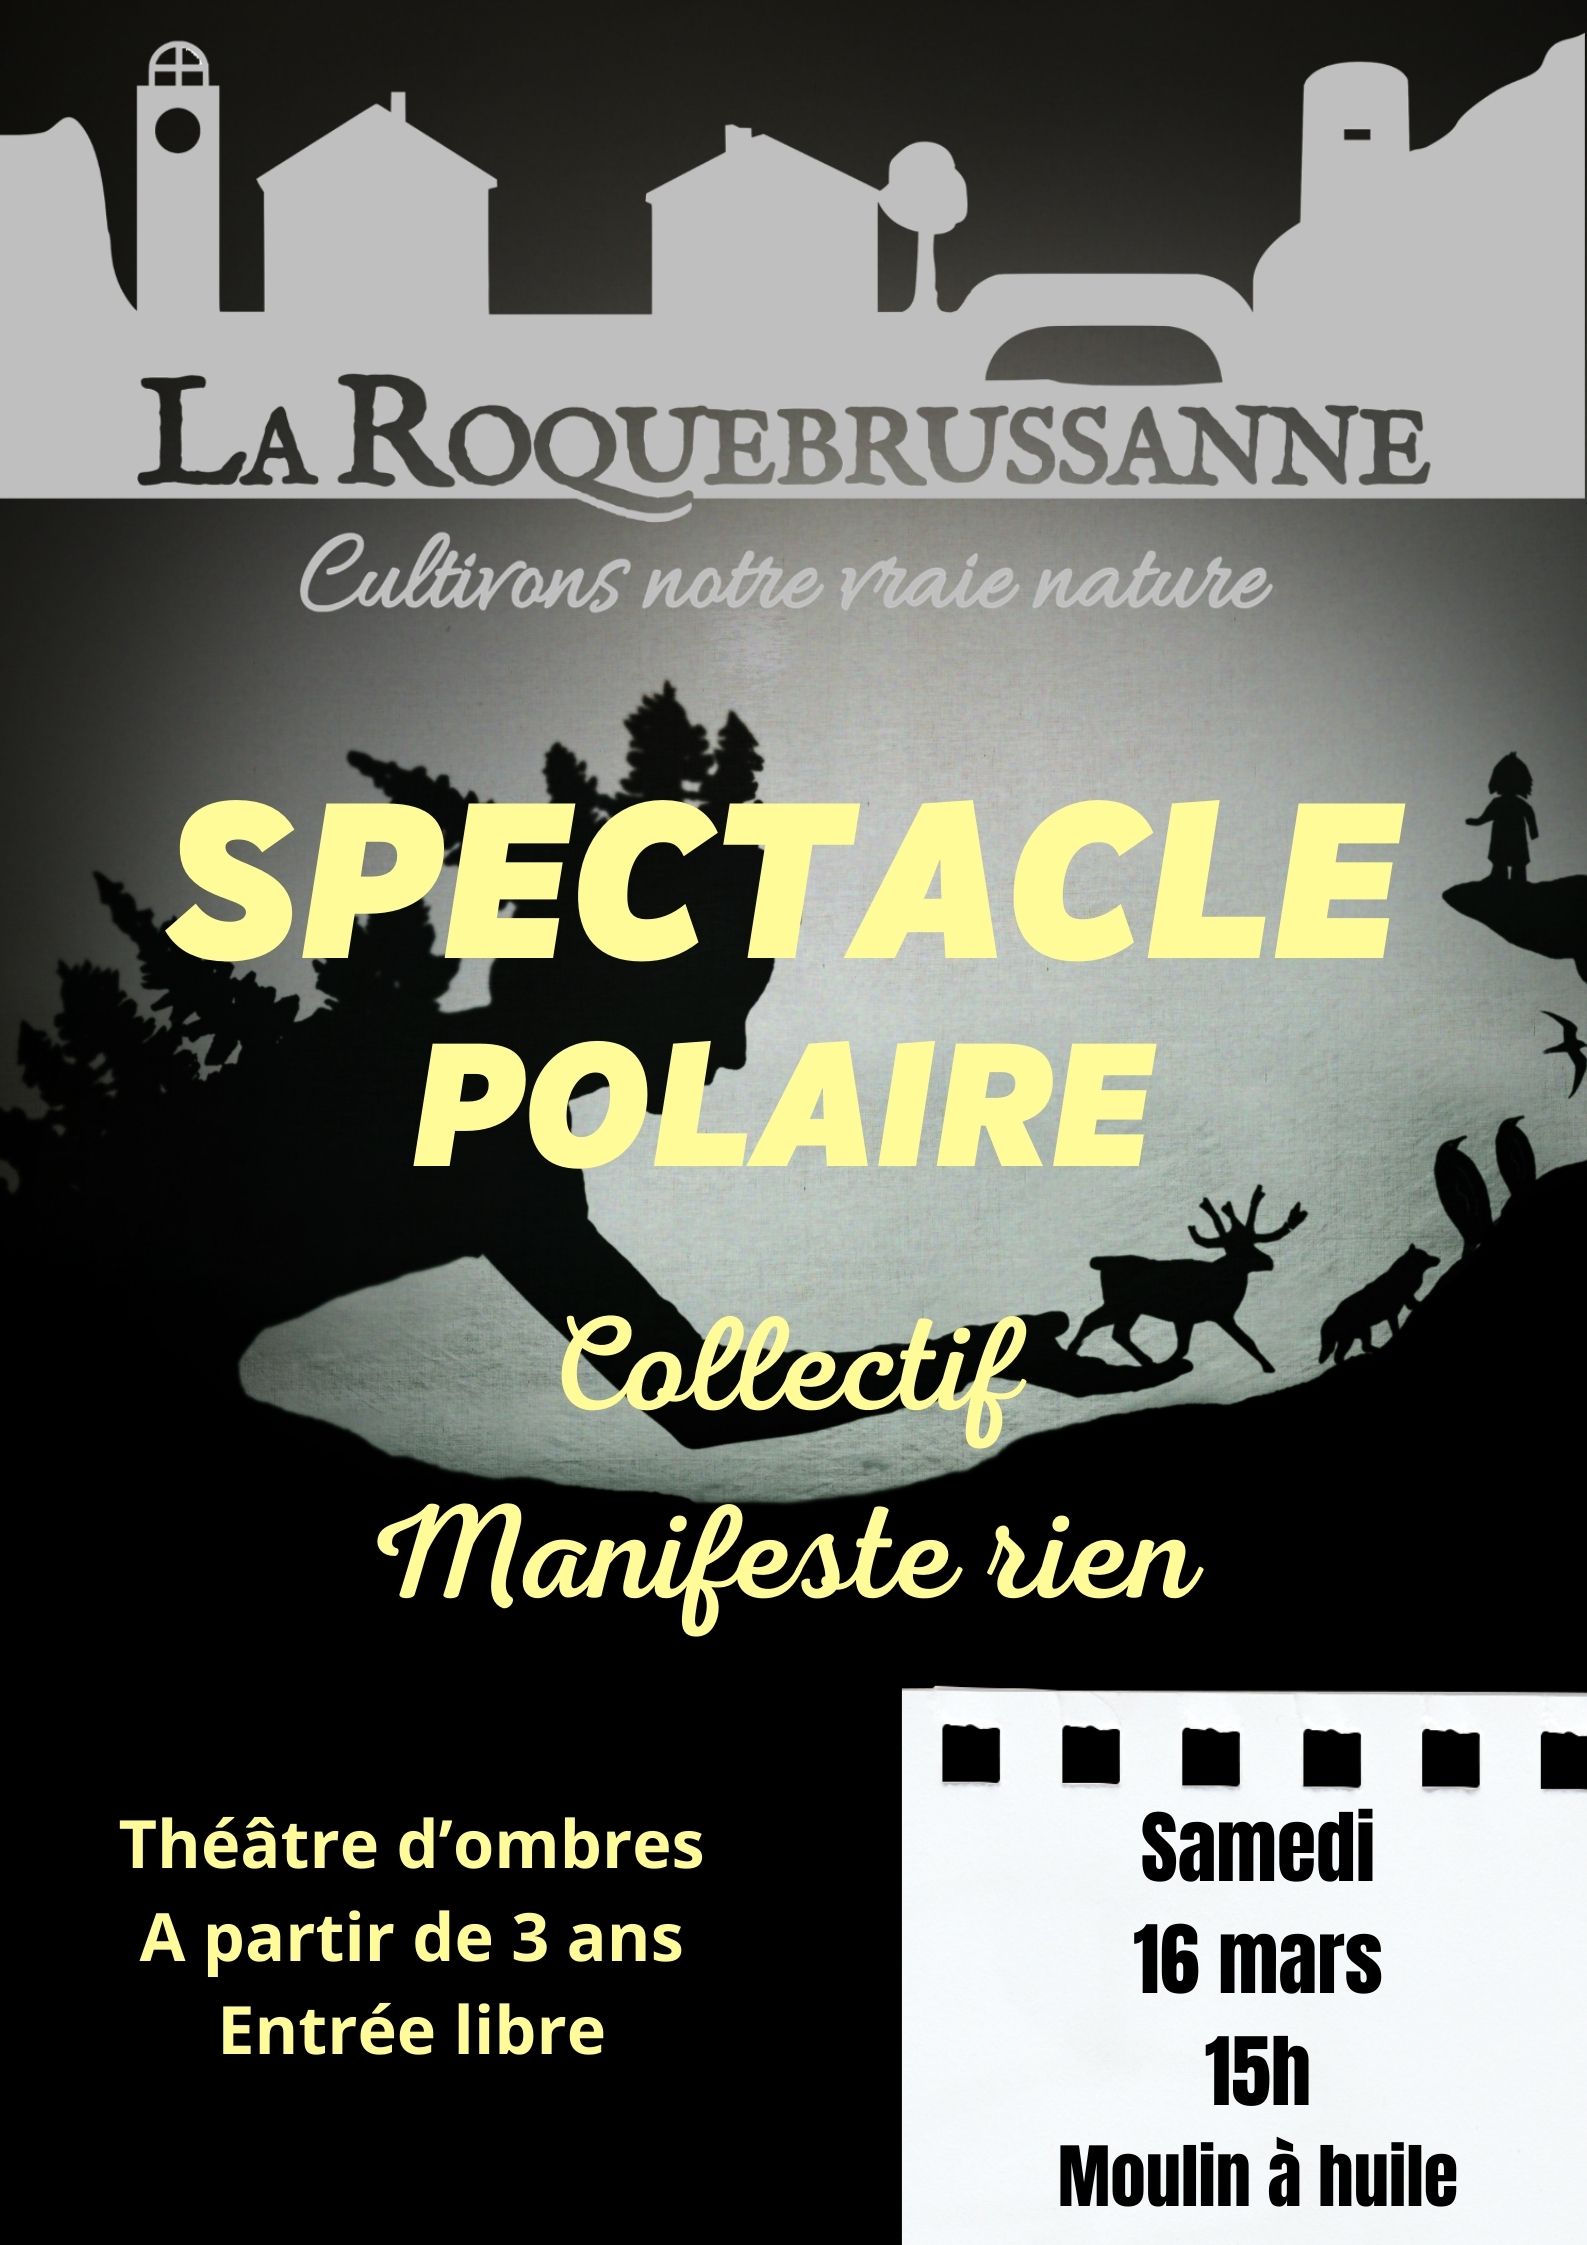 Spectacle polaire mars 24